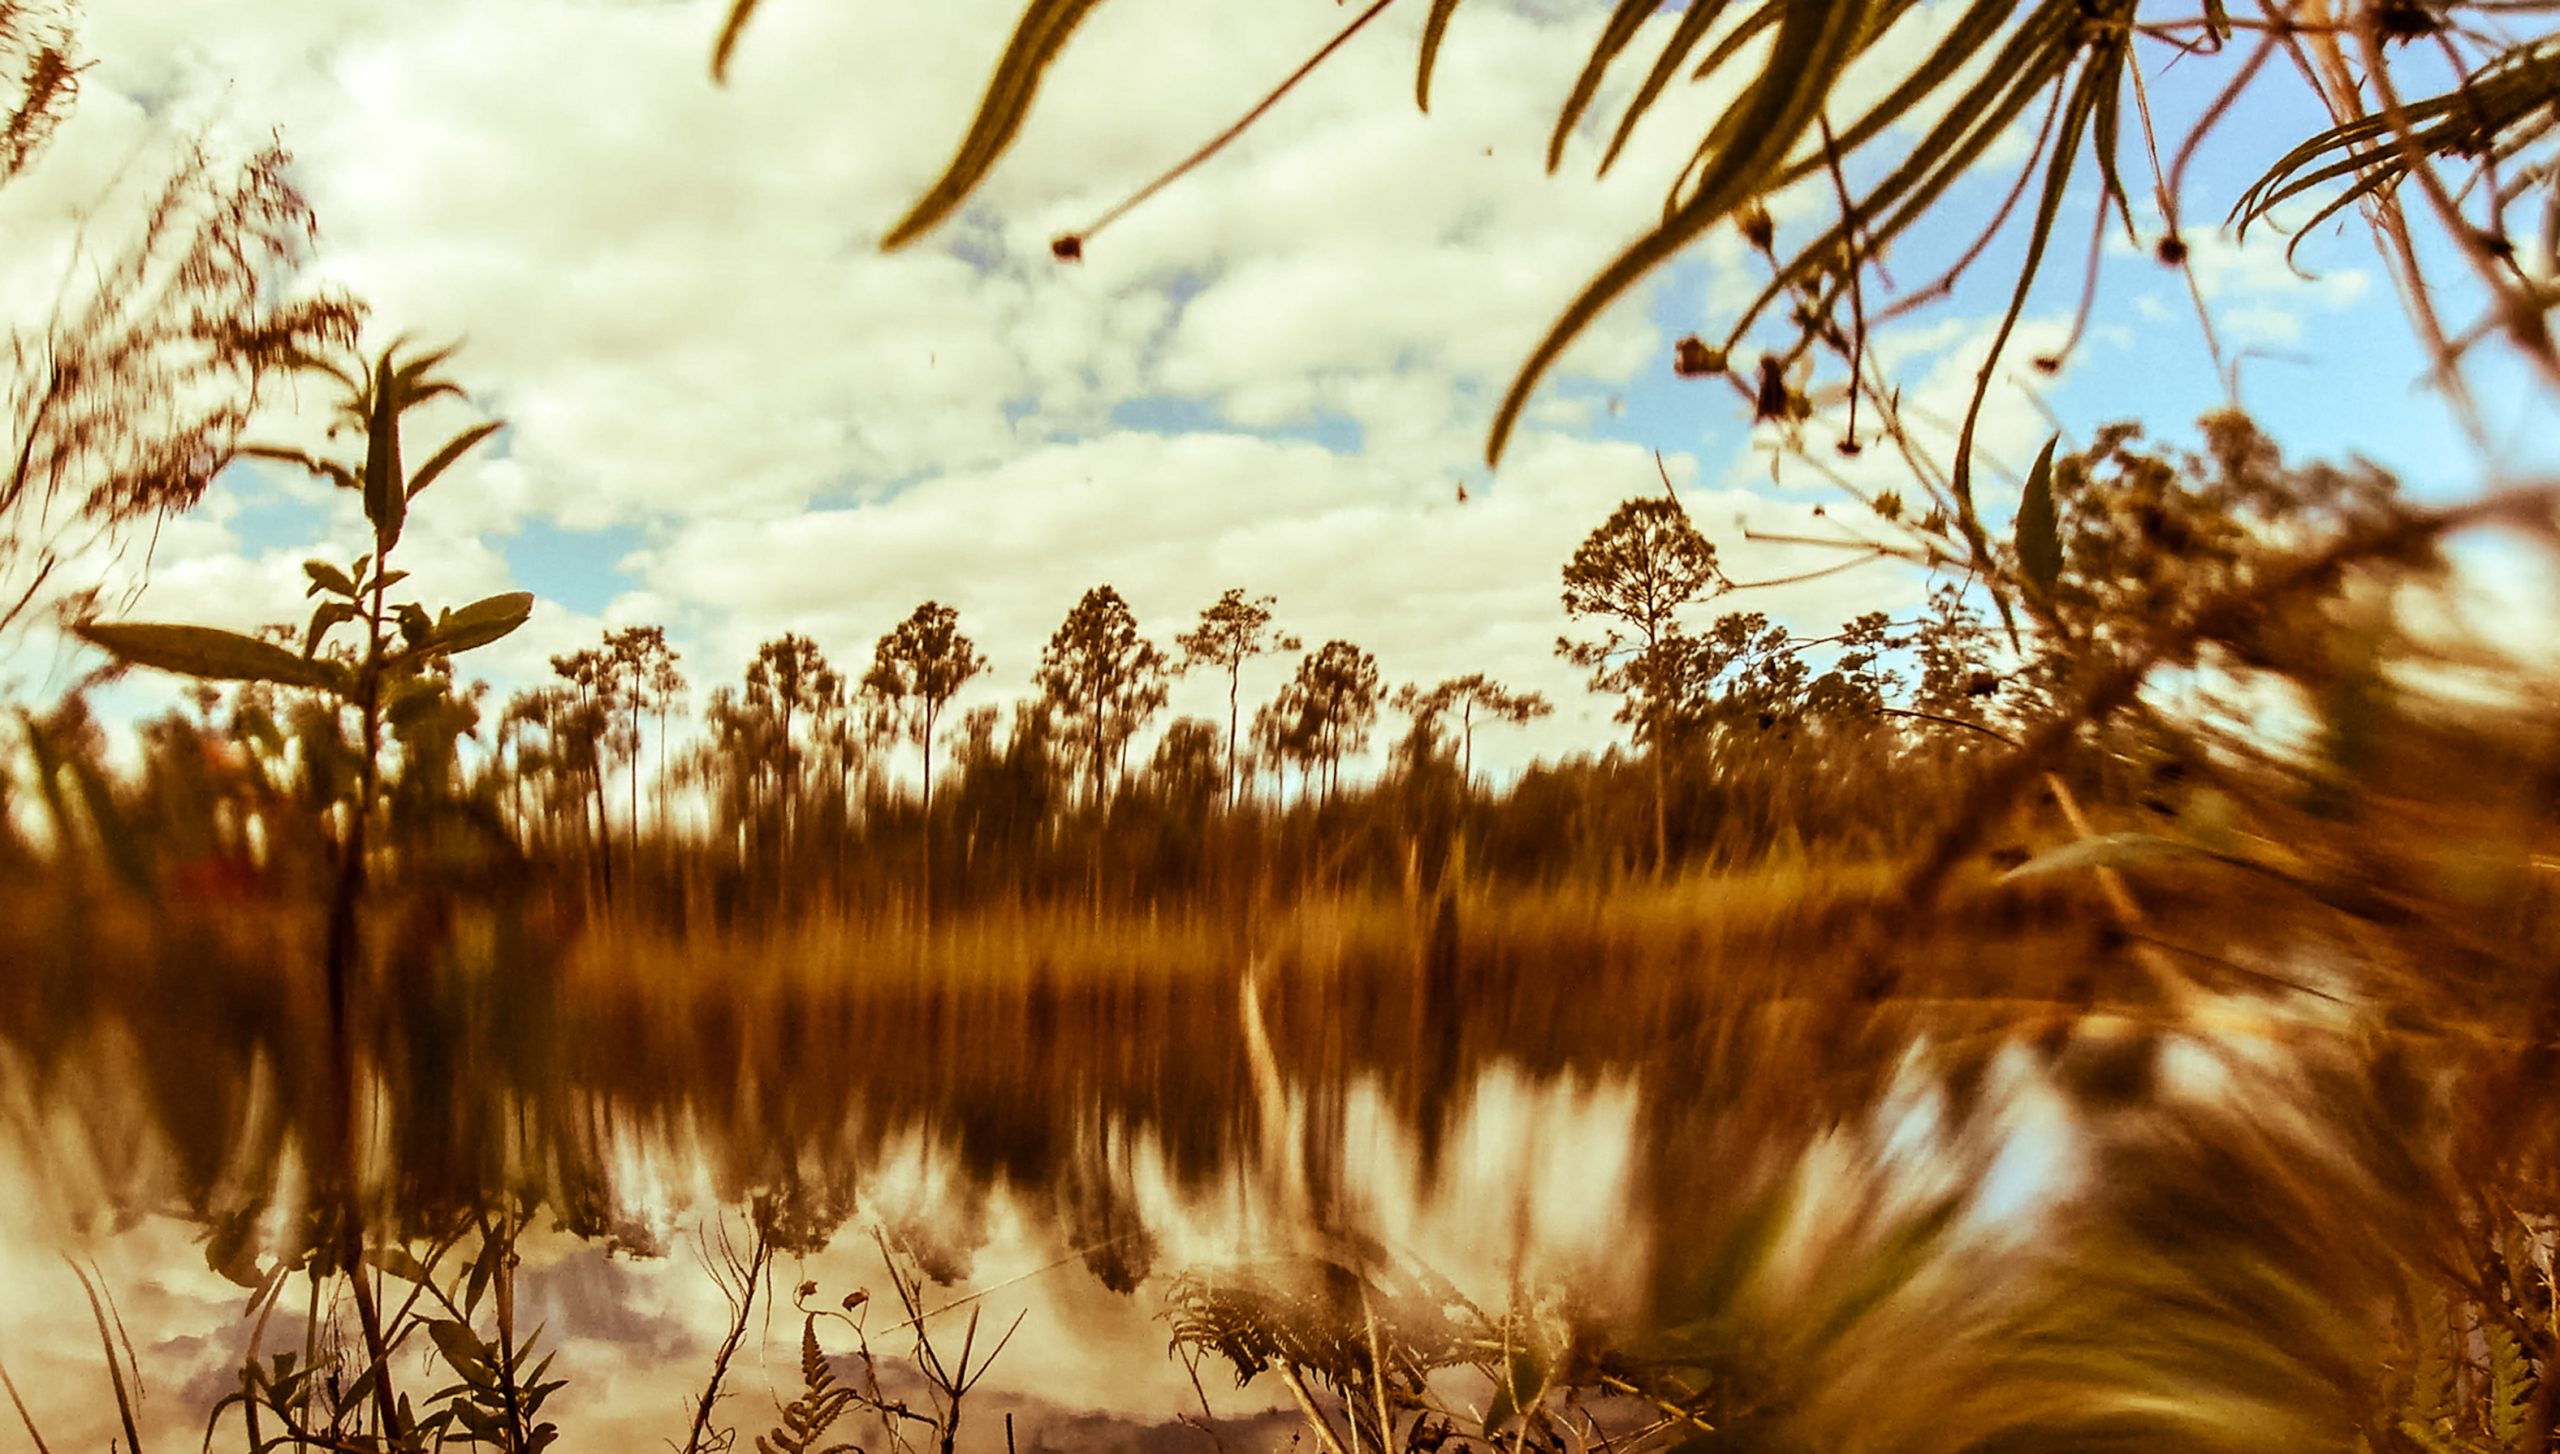 Slightly distorted image of a pond at water level with trees visible on the other side of the water. The water and trees are sepia while the sky is bright blue